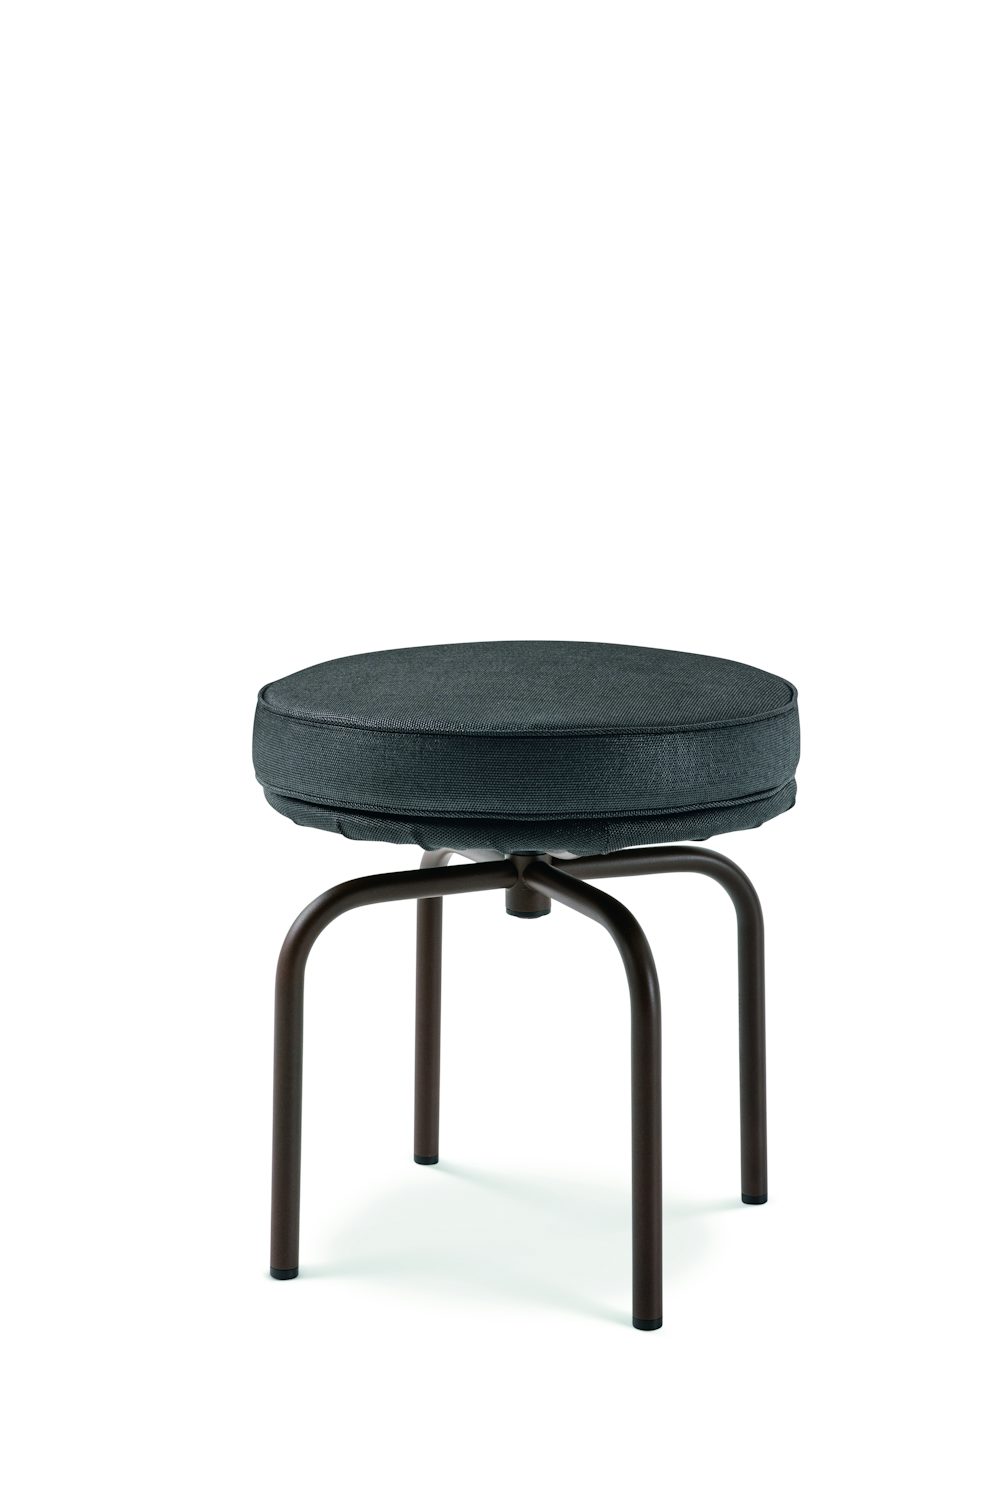 LC8 Outdoor Stool Perriand Jeanneret Corbusier Cassina 4